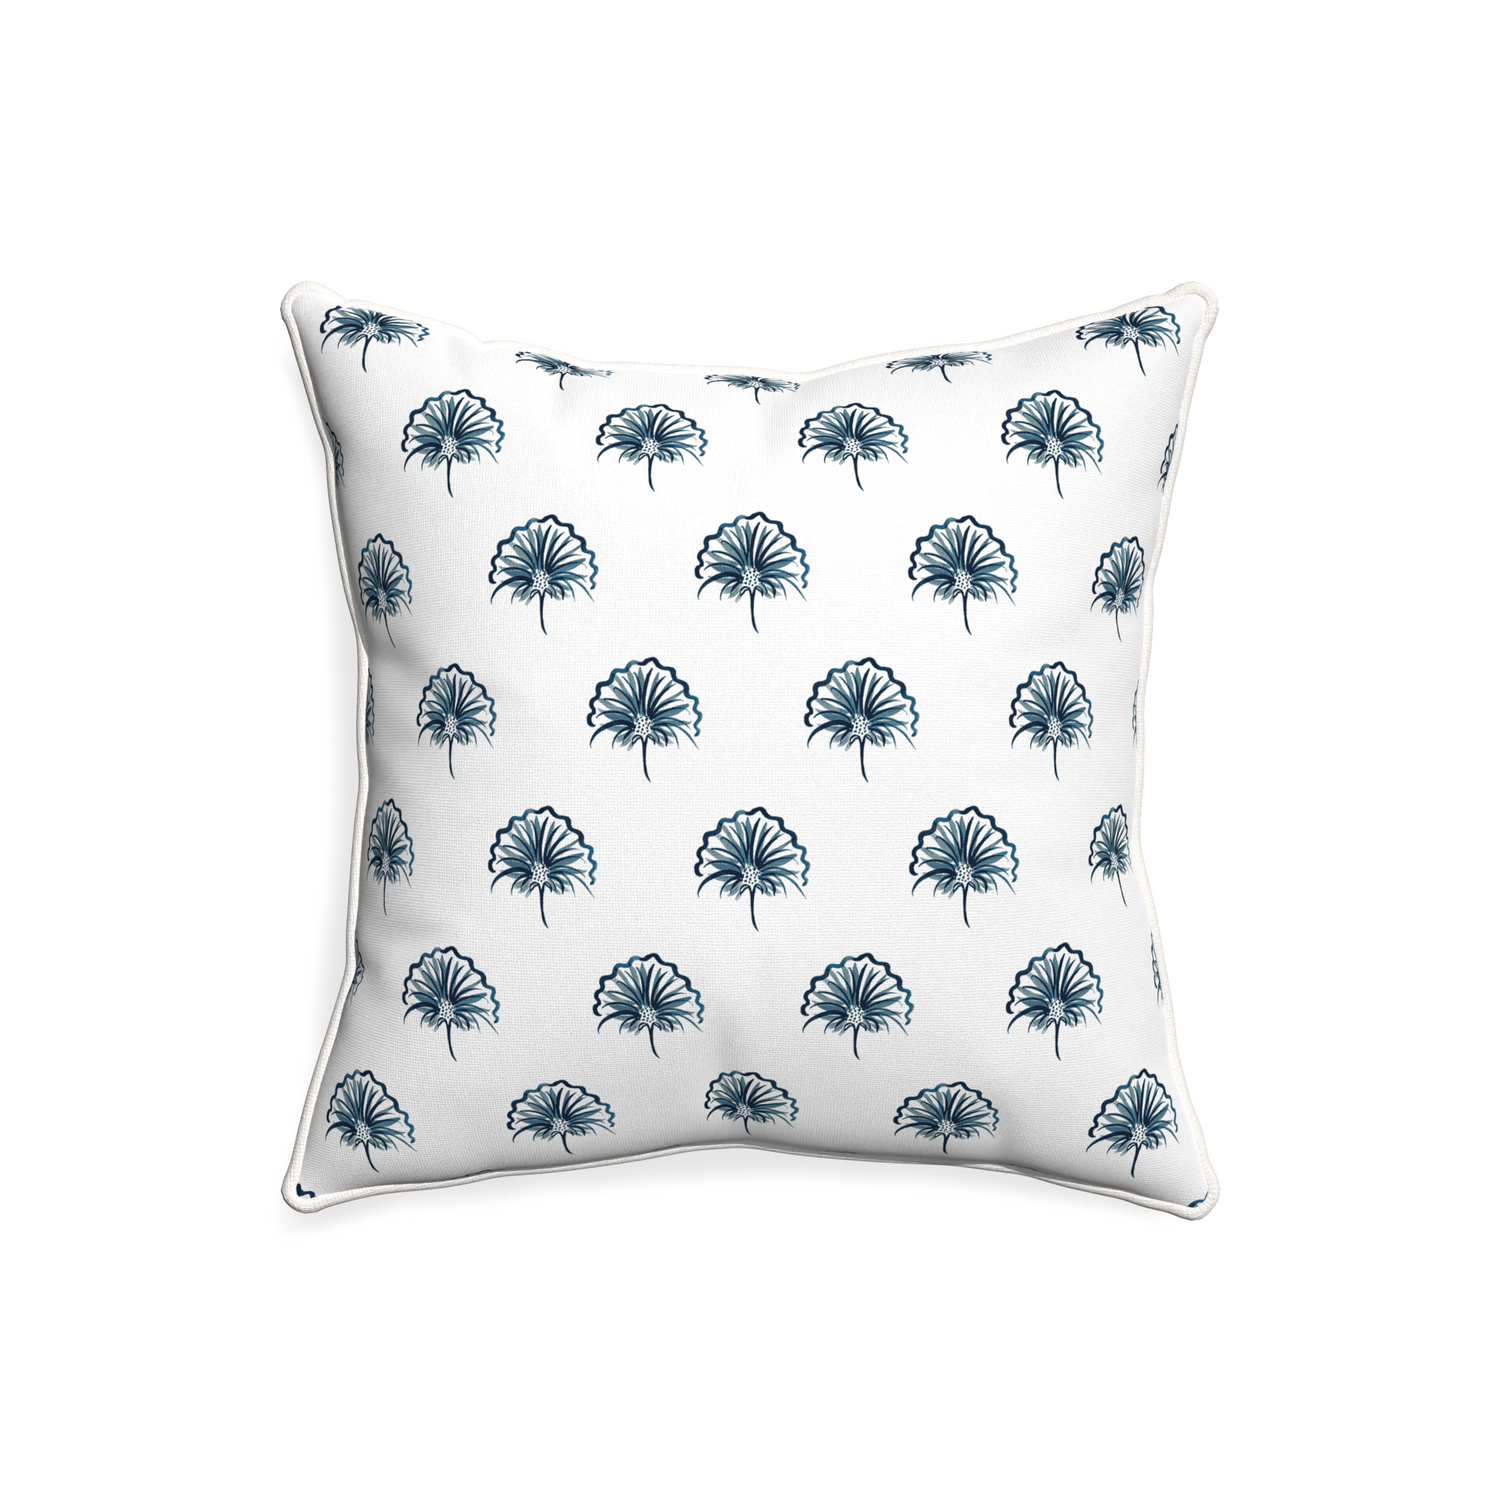 20-square penelope midnight custom pillow with snow piping on white background